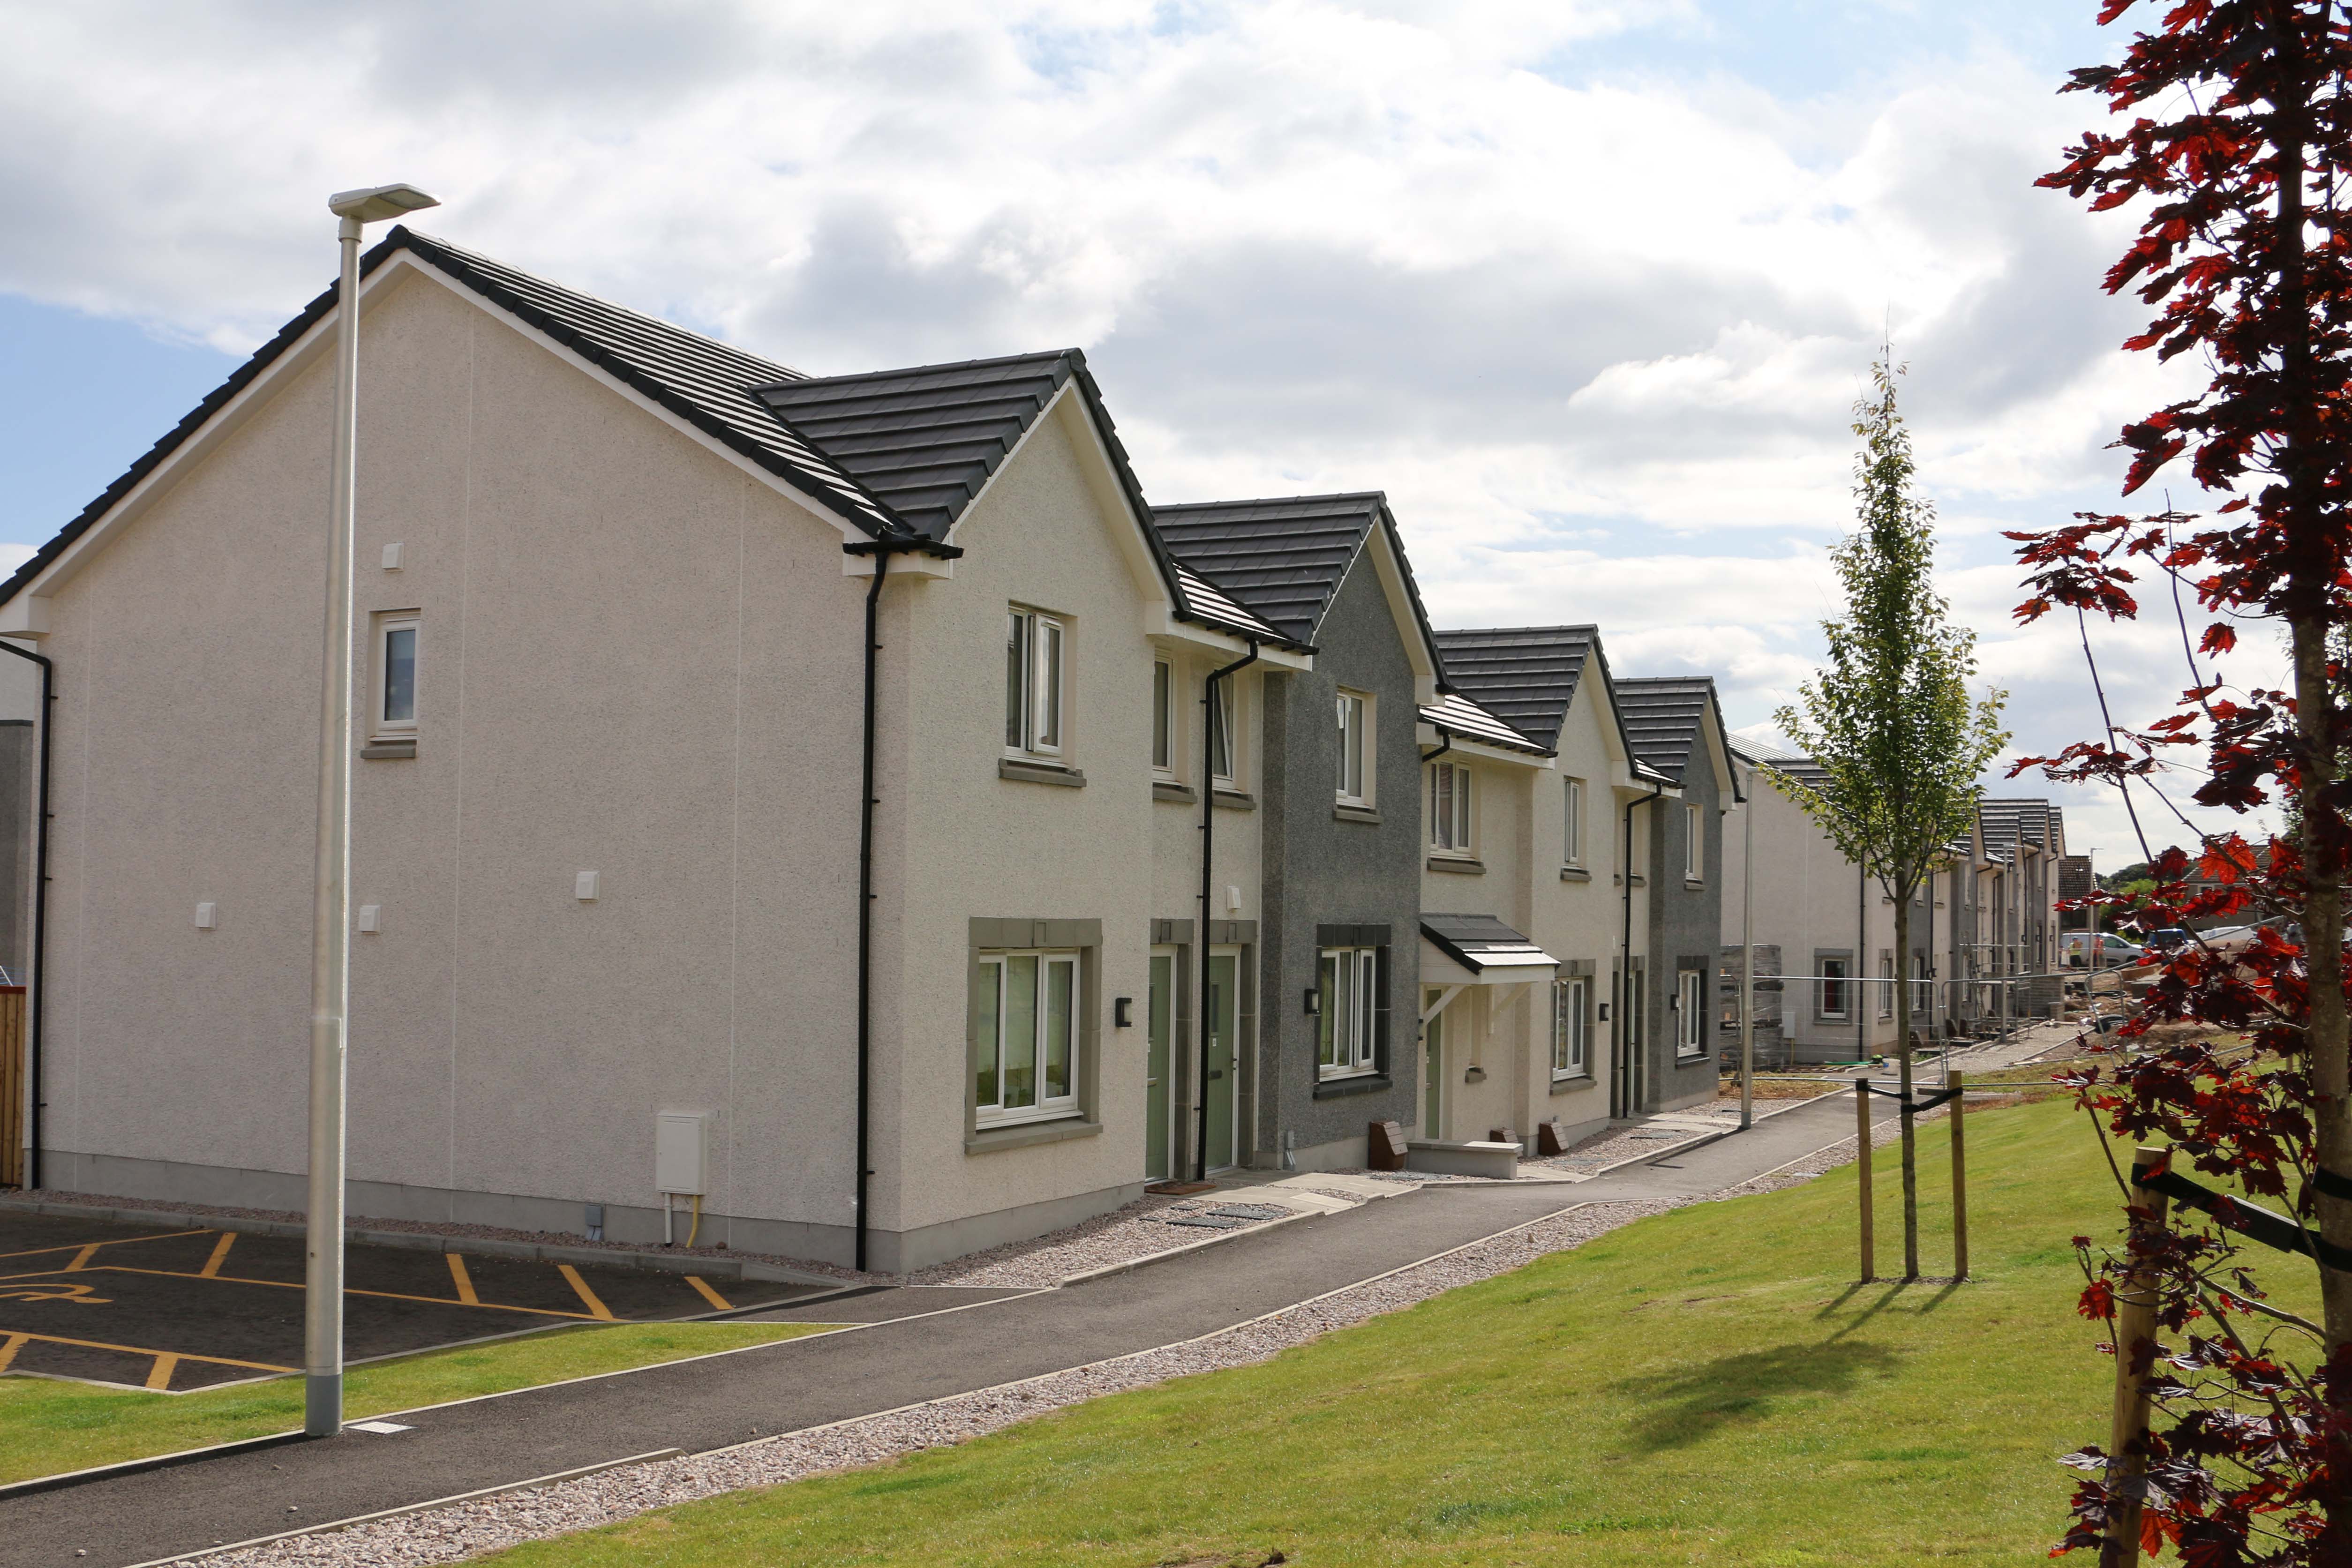 Housing minister formally opens newly completed Hillcrest development in Cove